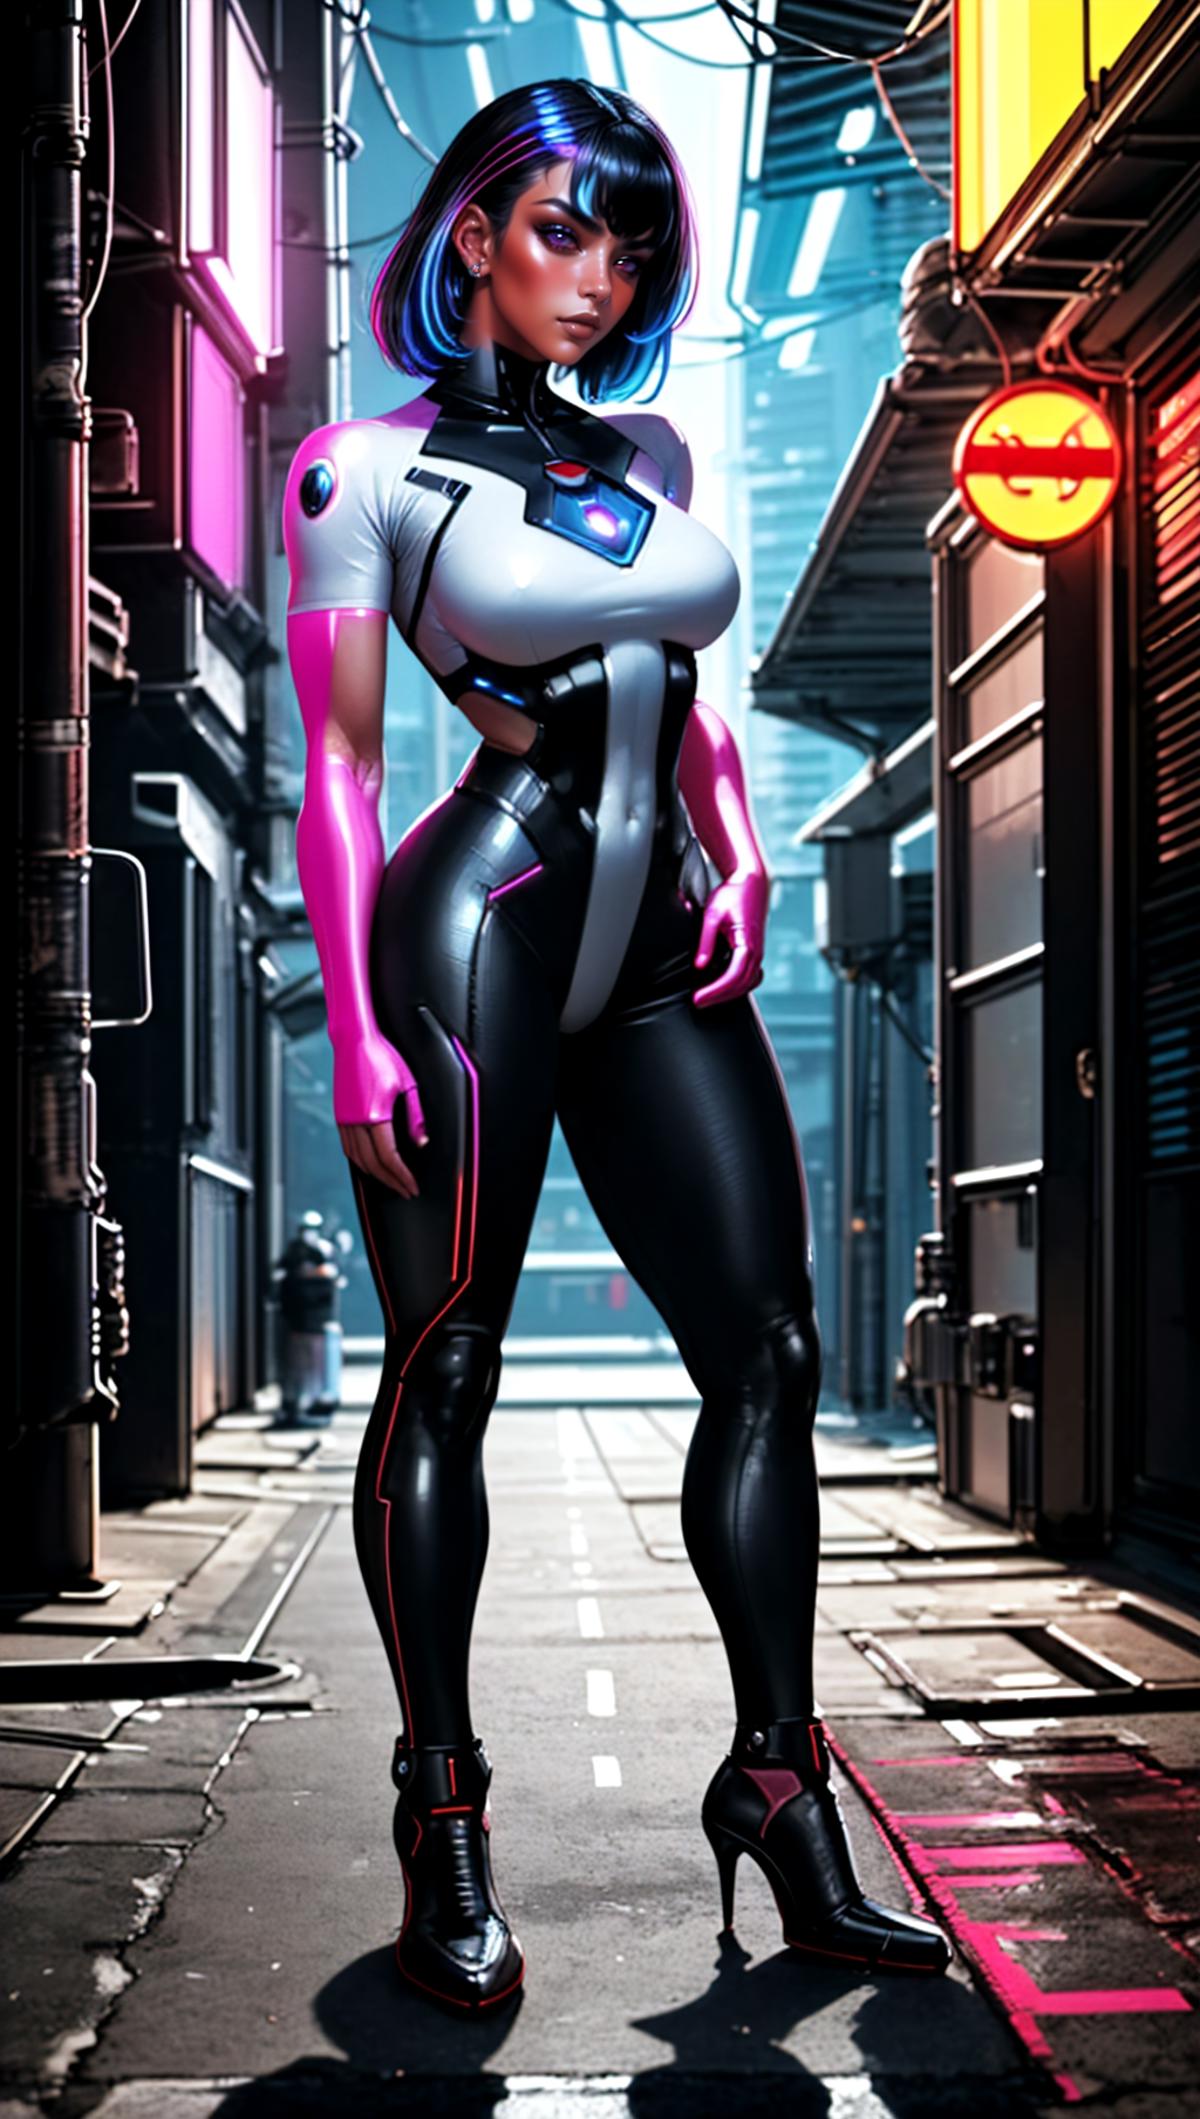 An animated image of a woman in a futuristic suit with pink and black colors.